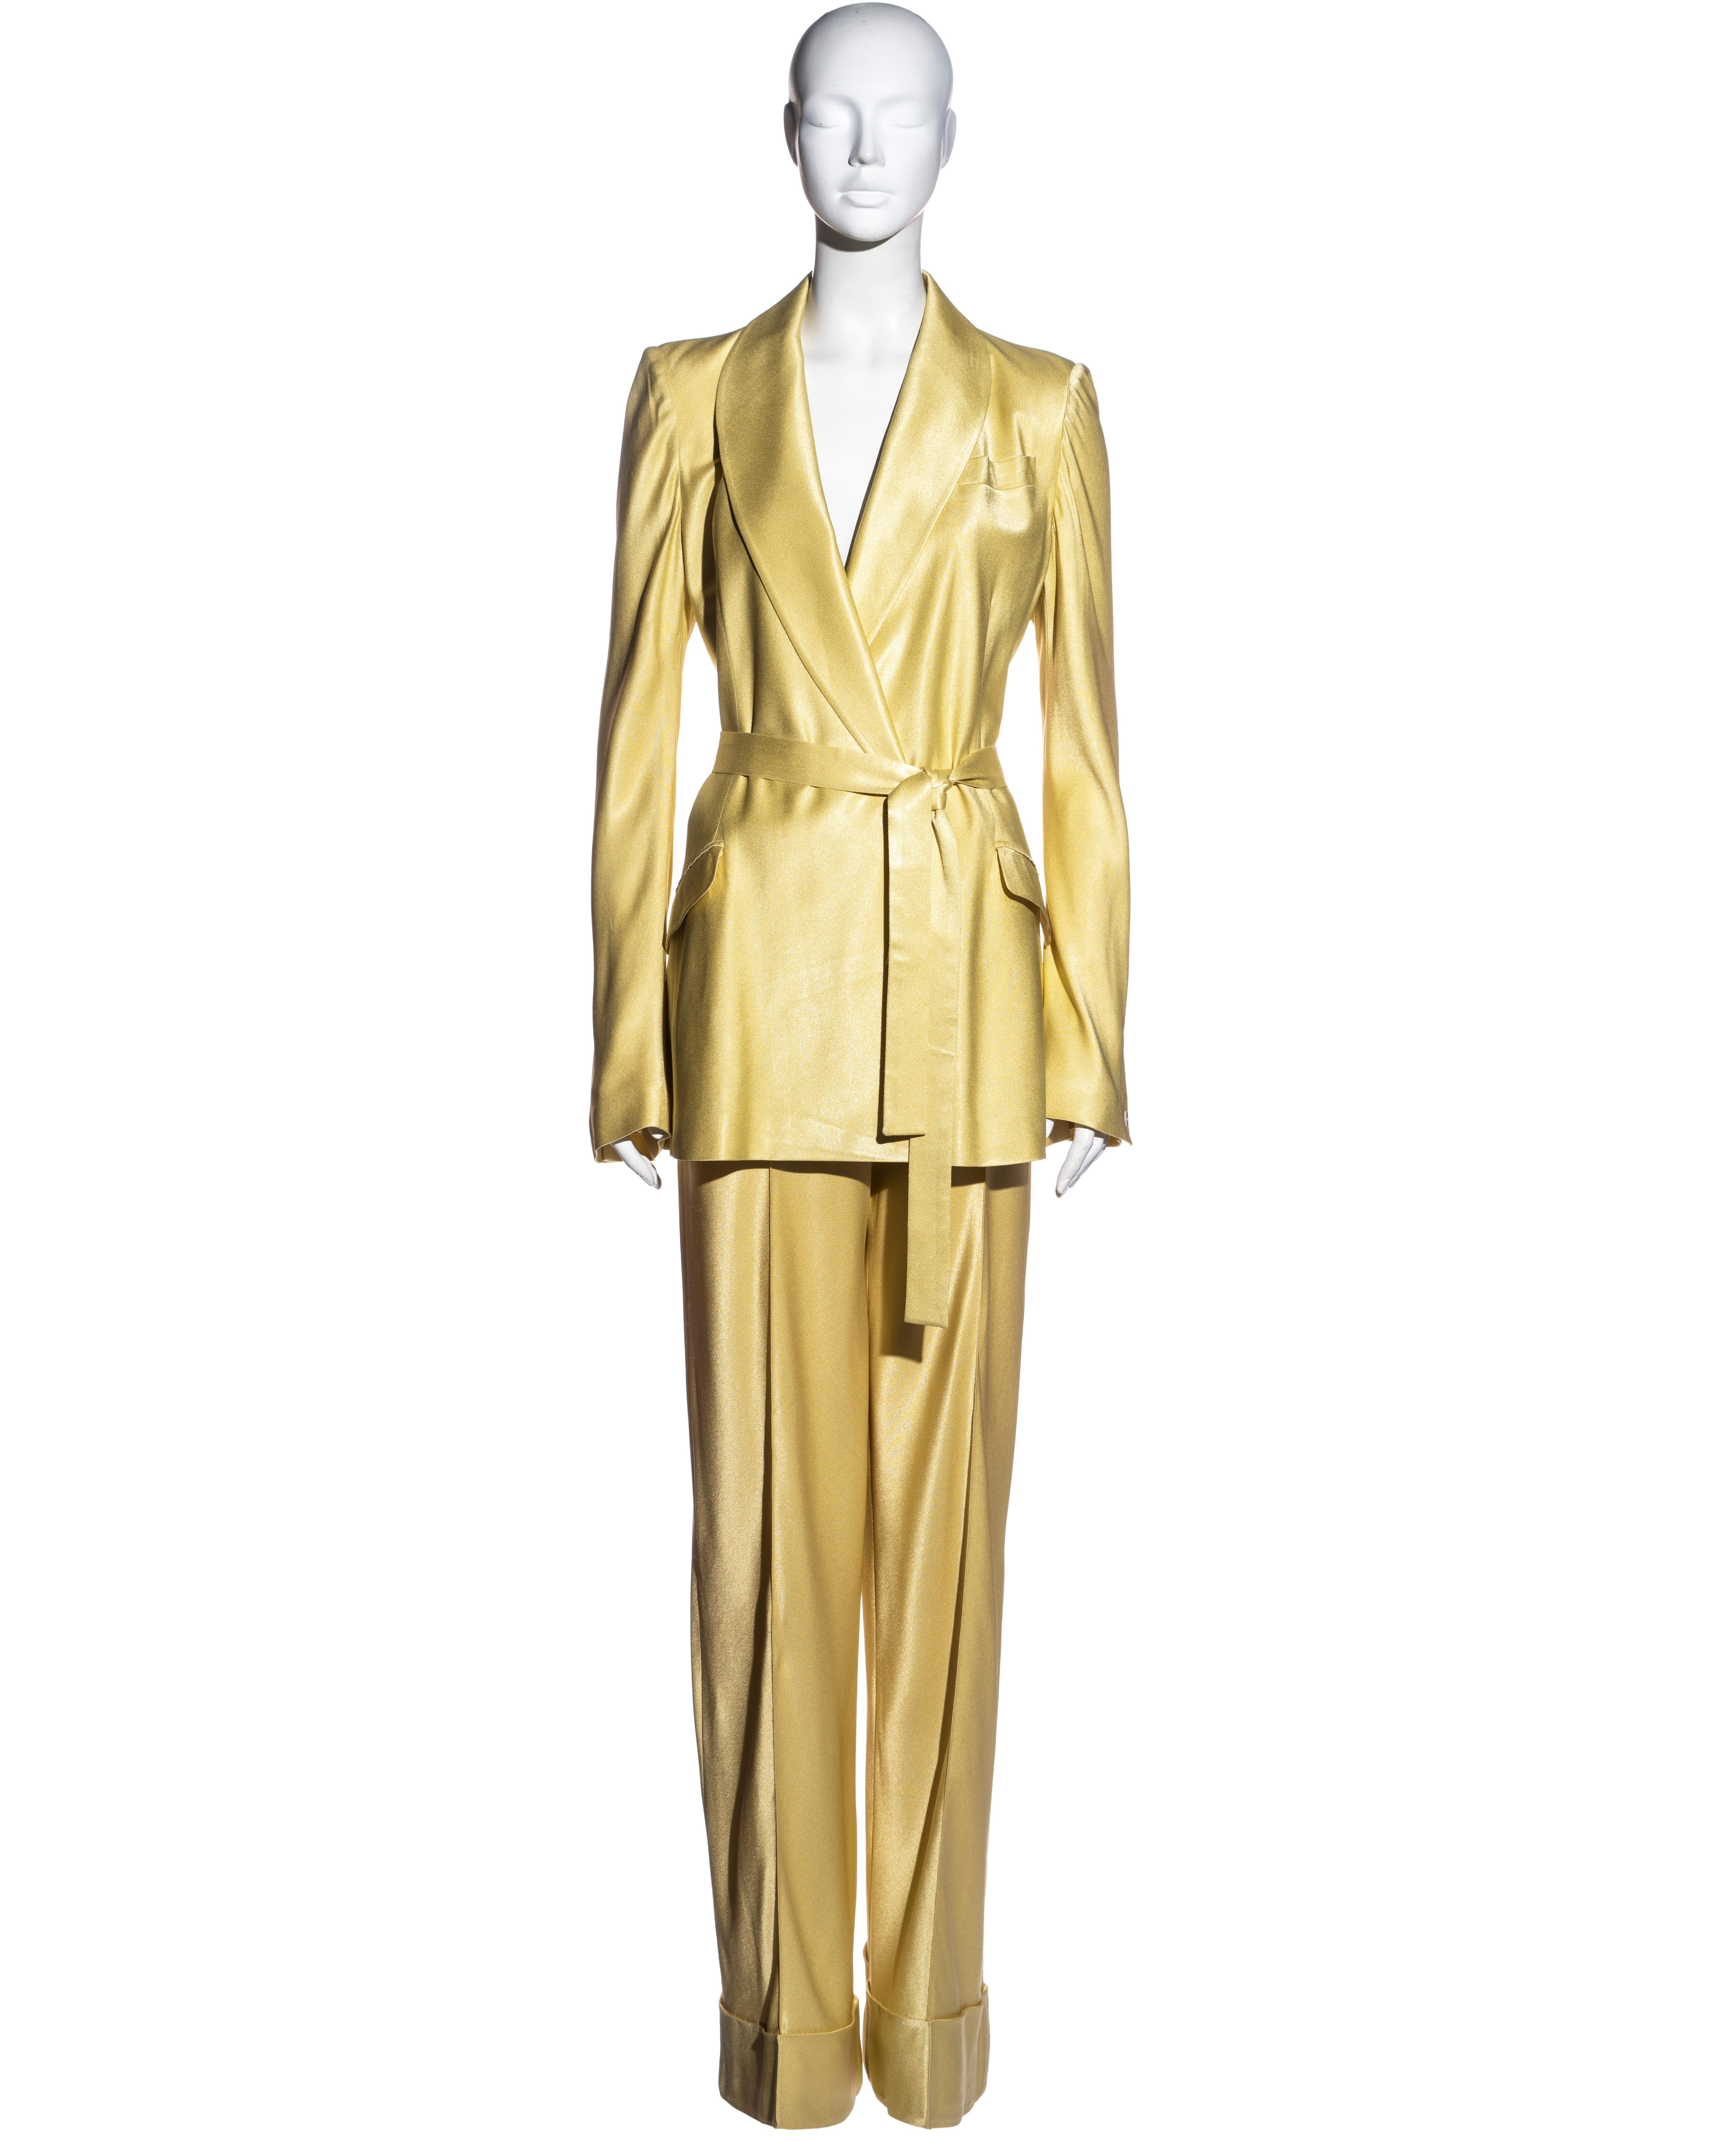 ▪ John Galliano yellow satin pantsuit 
▪ Double-breasted jacket with shawl lapel
▪ Two front flap pockets 
▪ Matching waist belt
▪ Mother of pearl buttons 
▪ Wide leg pants with turn-ups 
▪ Cream silk lining
▪ FR 44 - UK 16 - US 12 
▪ Spring-Summer